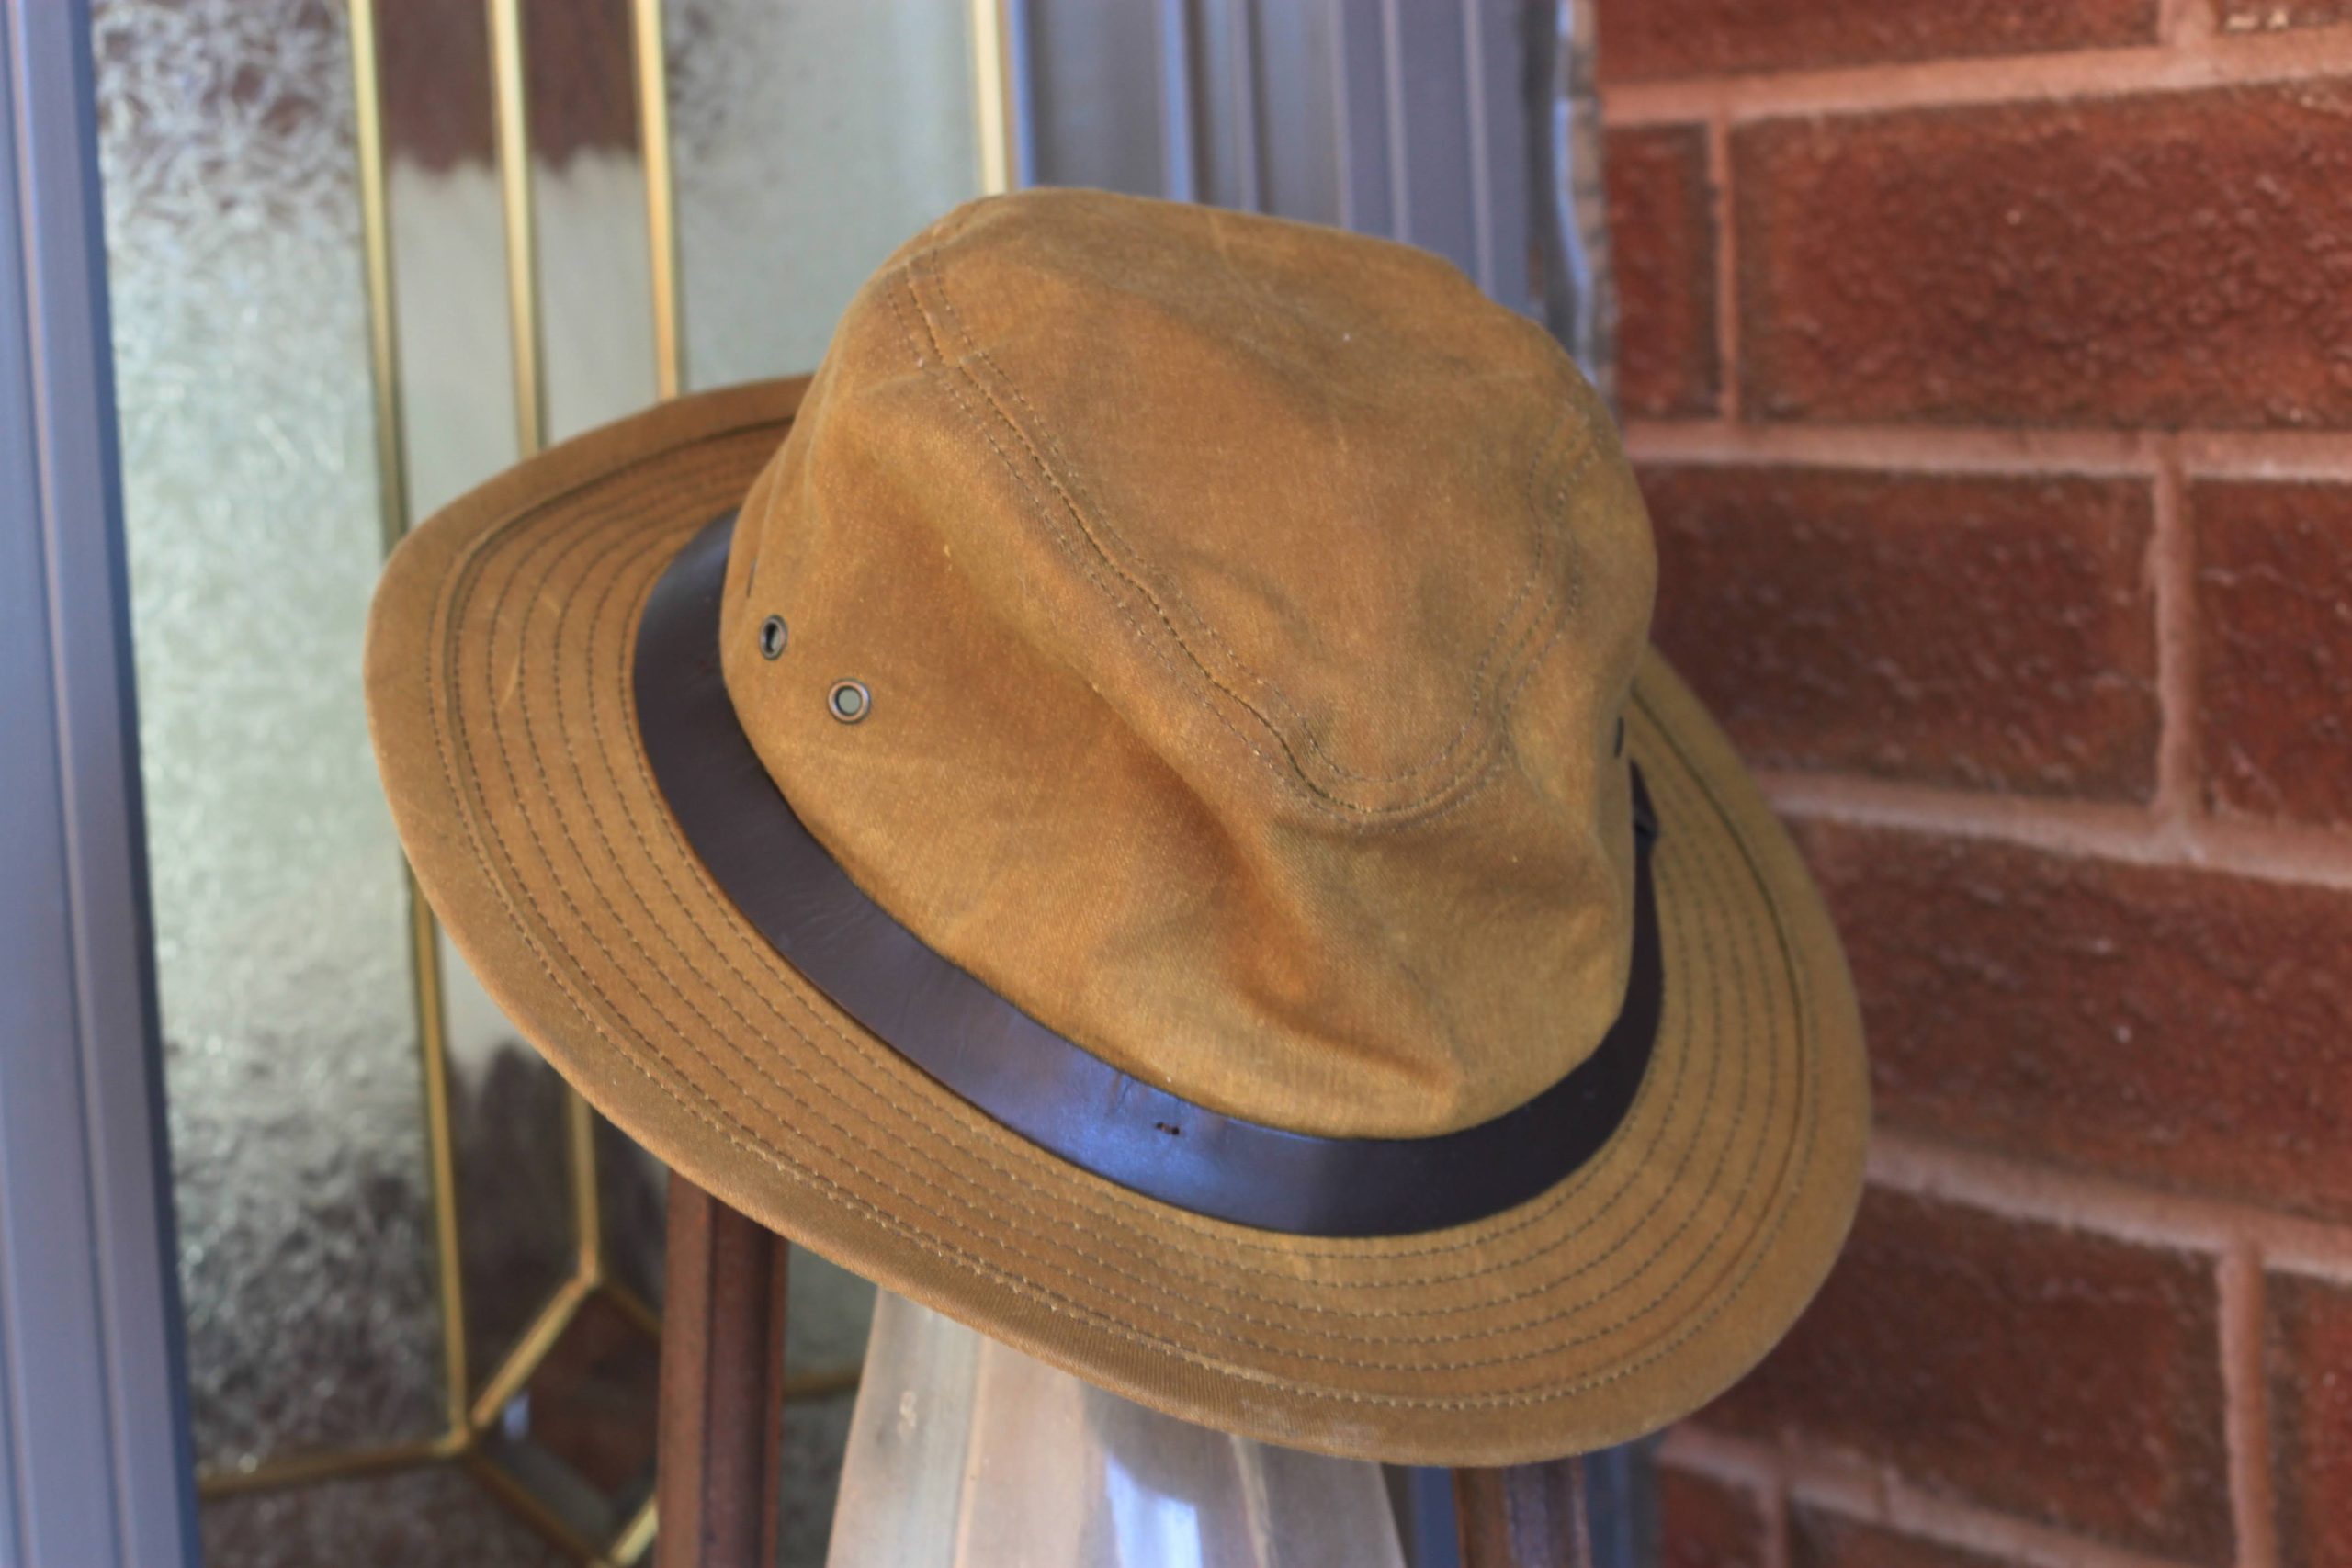 Filson's Tin Cloth Packer Hat Review - stridewise.com